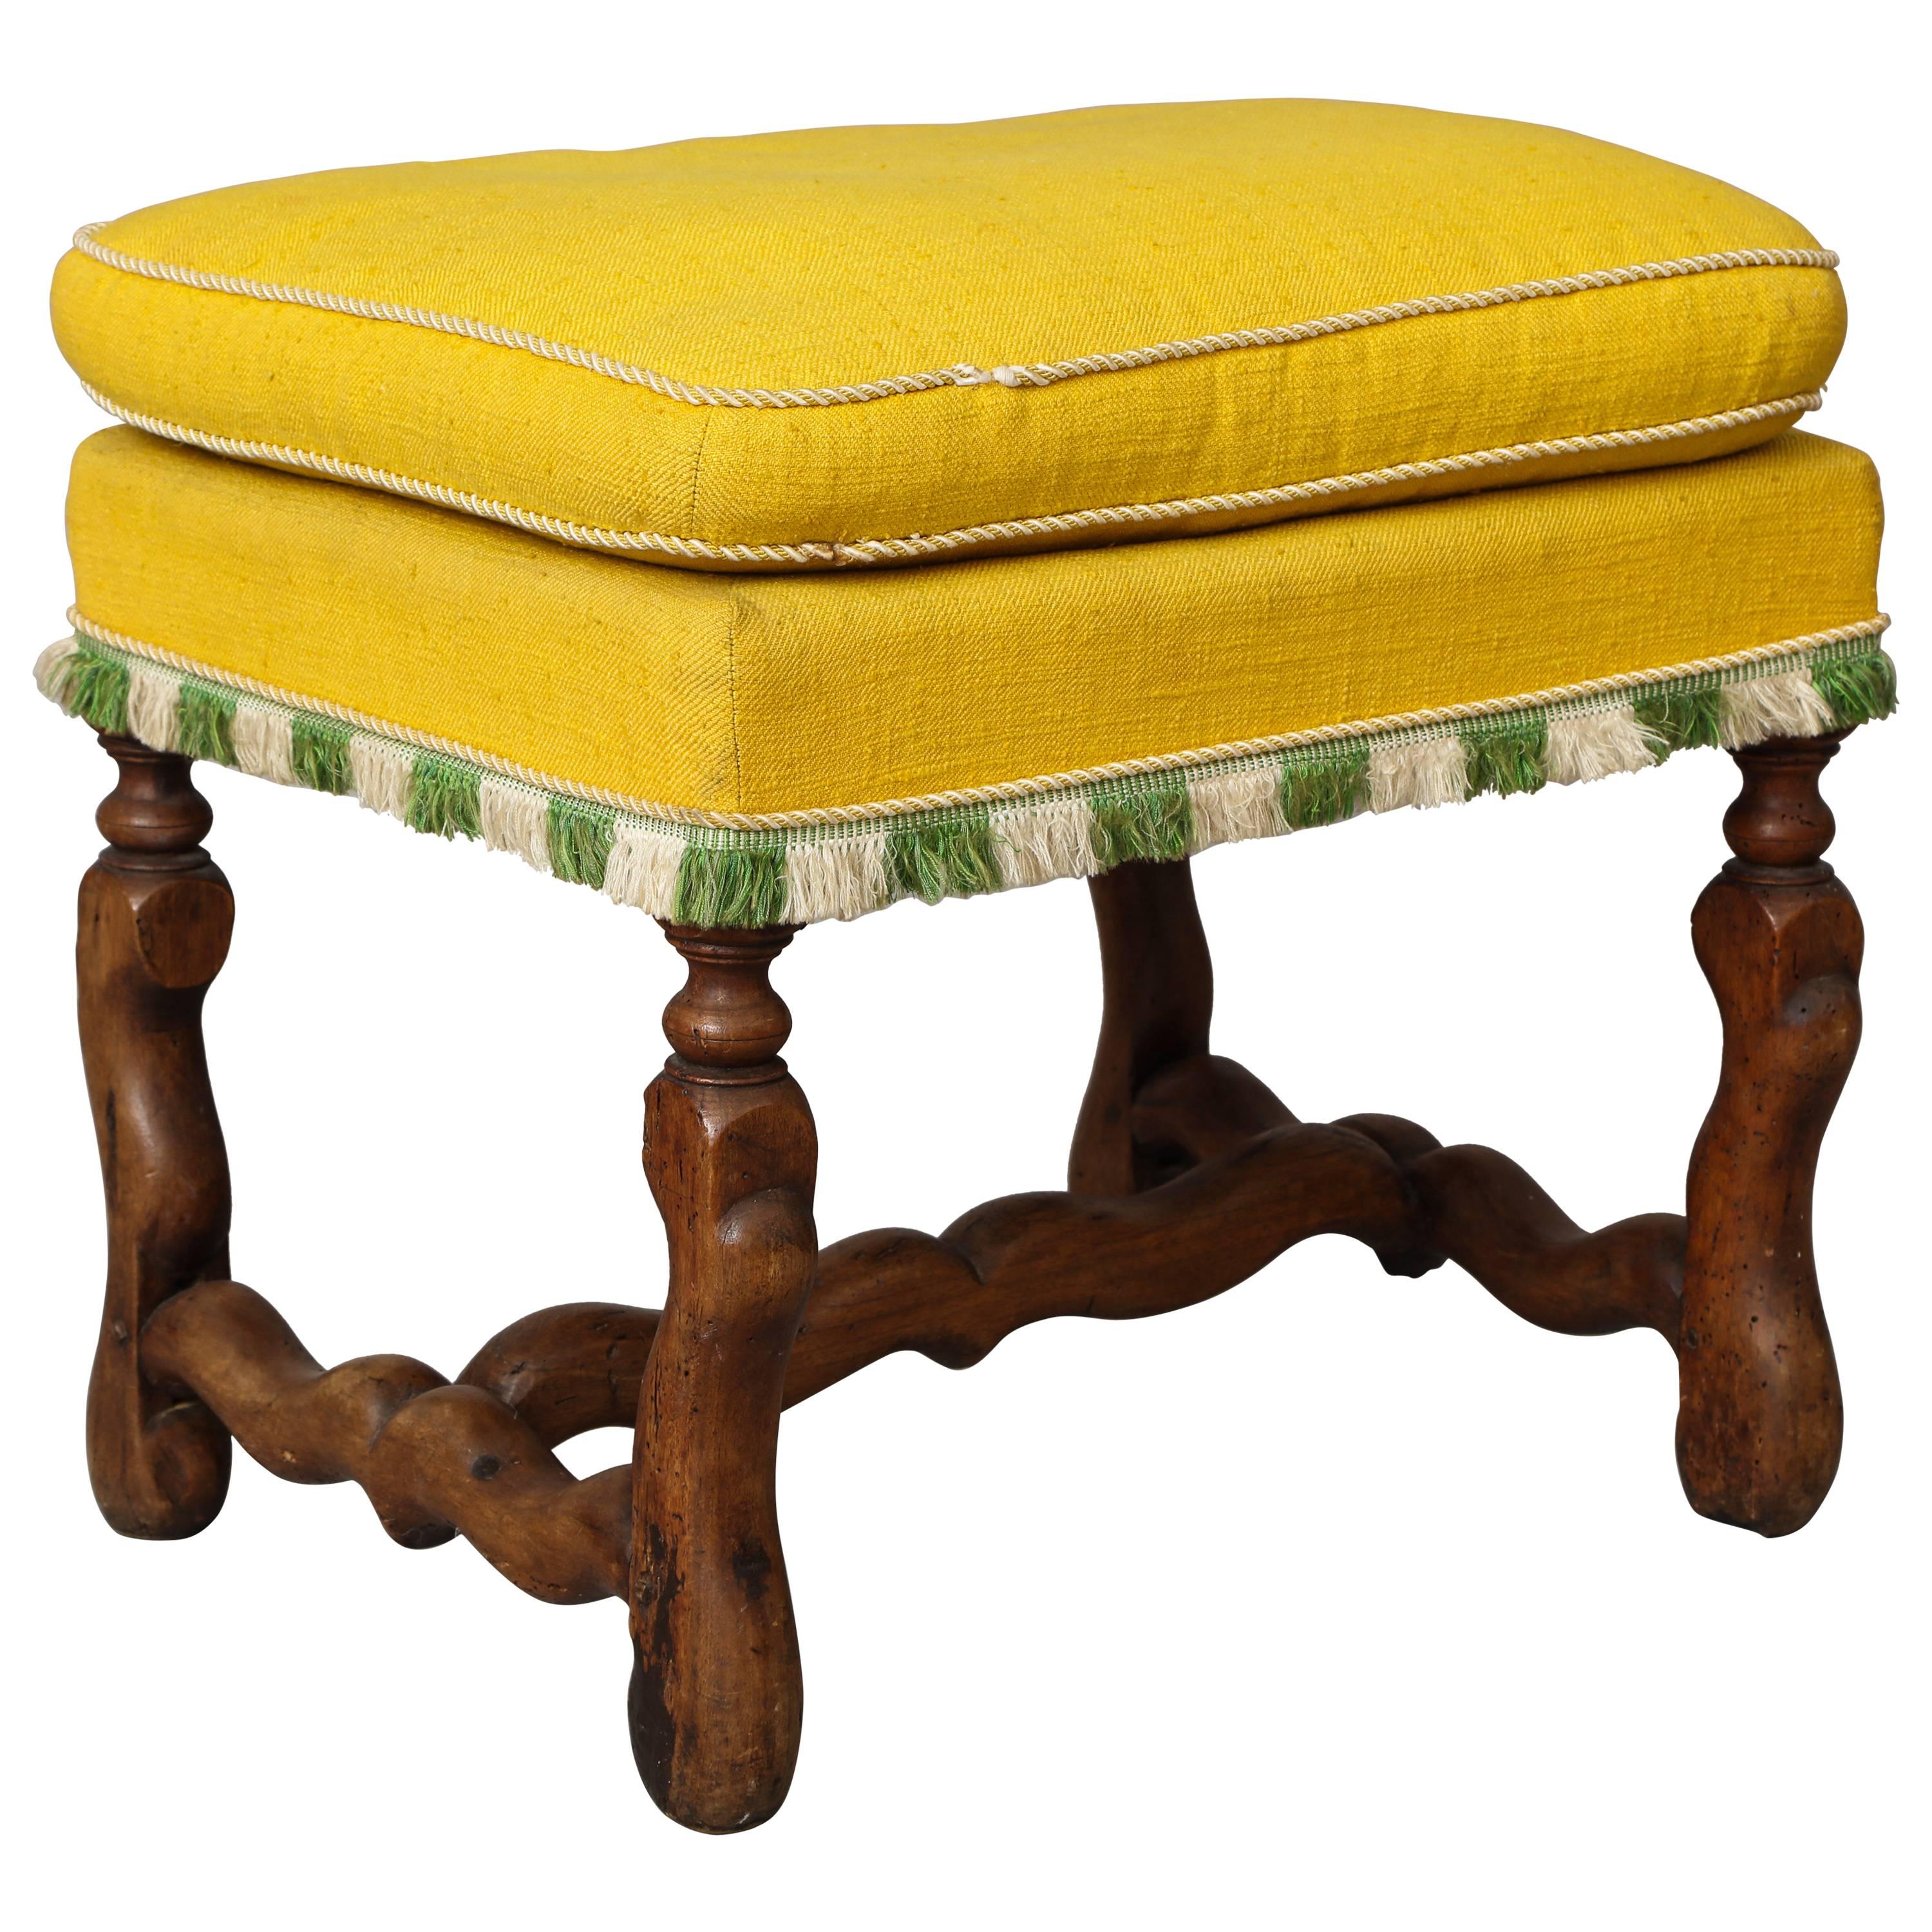 Louis XIII French Walnut Stool with ‘Os De Mouton’ Legs and Stretcher